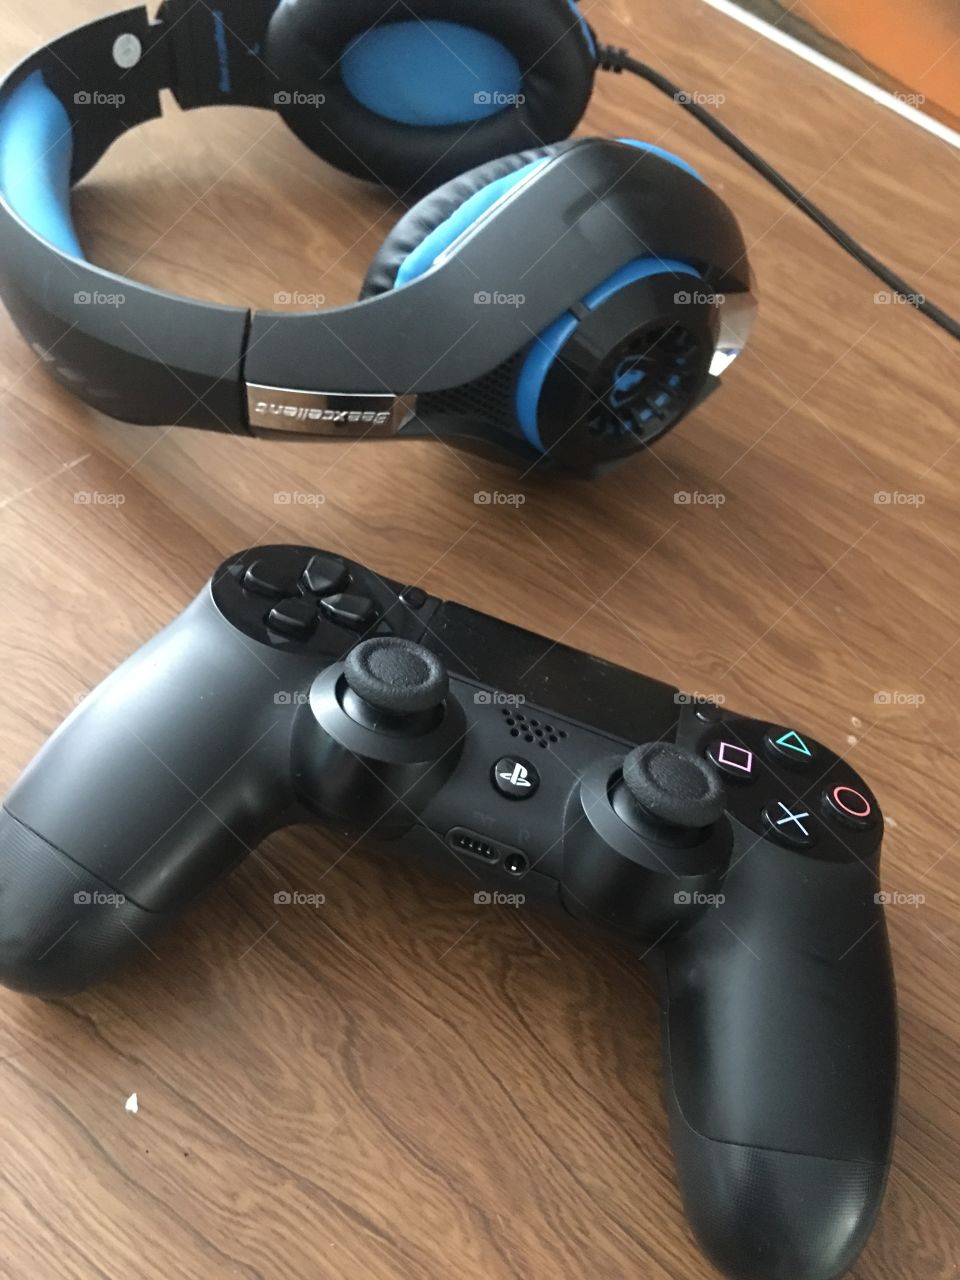 A PS4 controller and my blue and black gaming headset on a wooden table. Light coming from the left. 